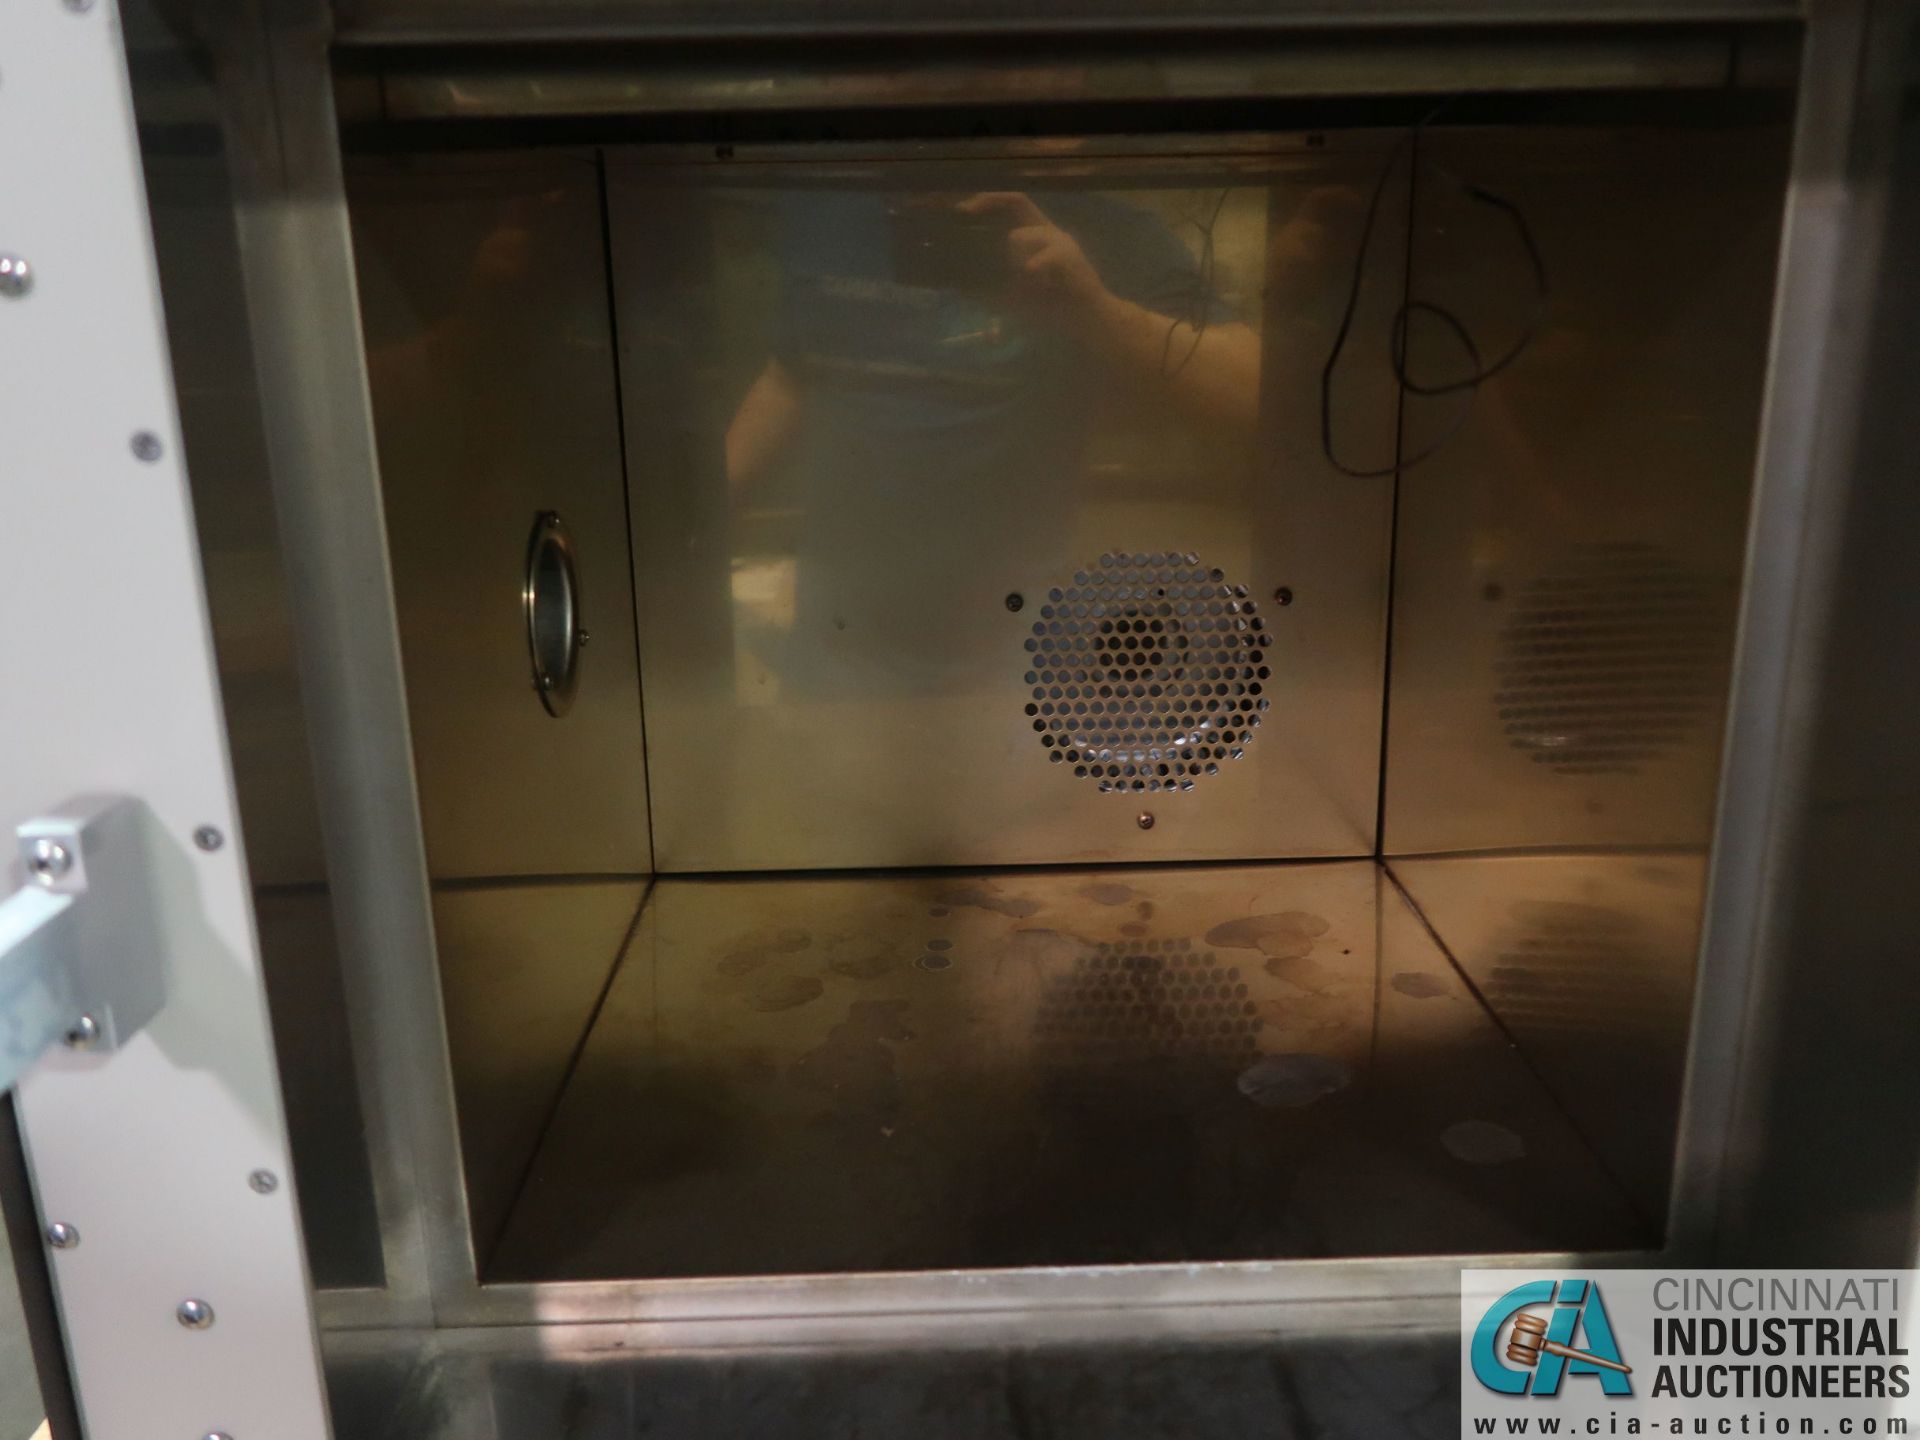 SUN ELECTRIC MODEL ECI-3W ELECTRIC TEST CHAMBER; S/N AA2772, TEMPERATURE RANGE -73 TO 400 DEGREES - Image 2 of 7